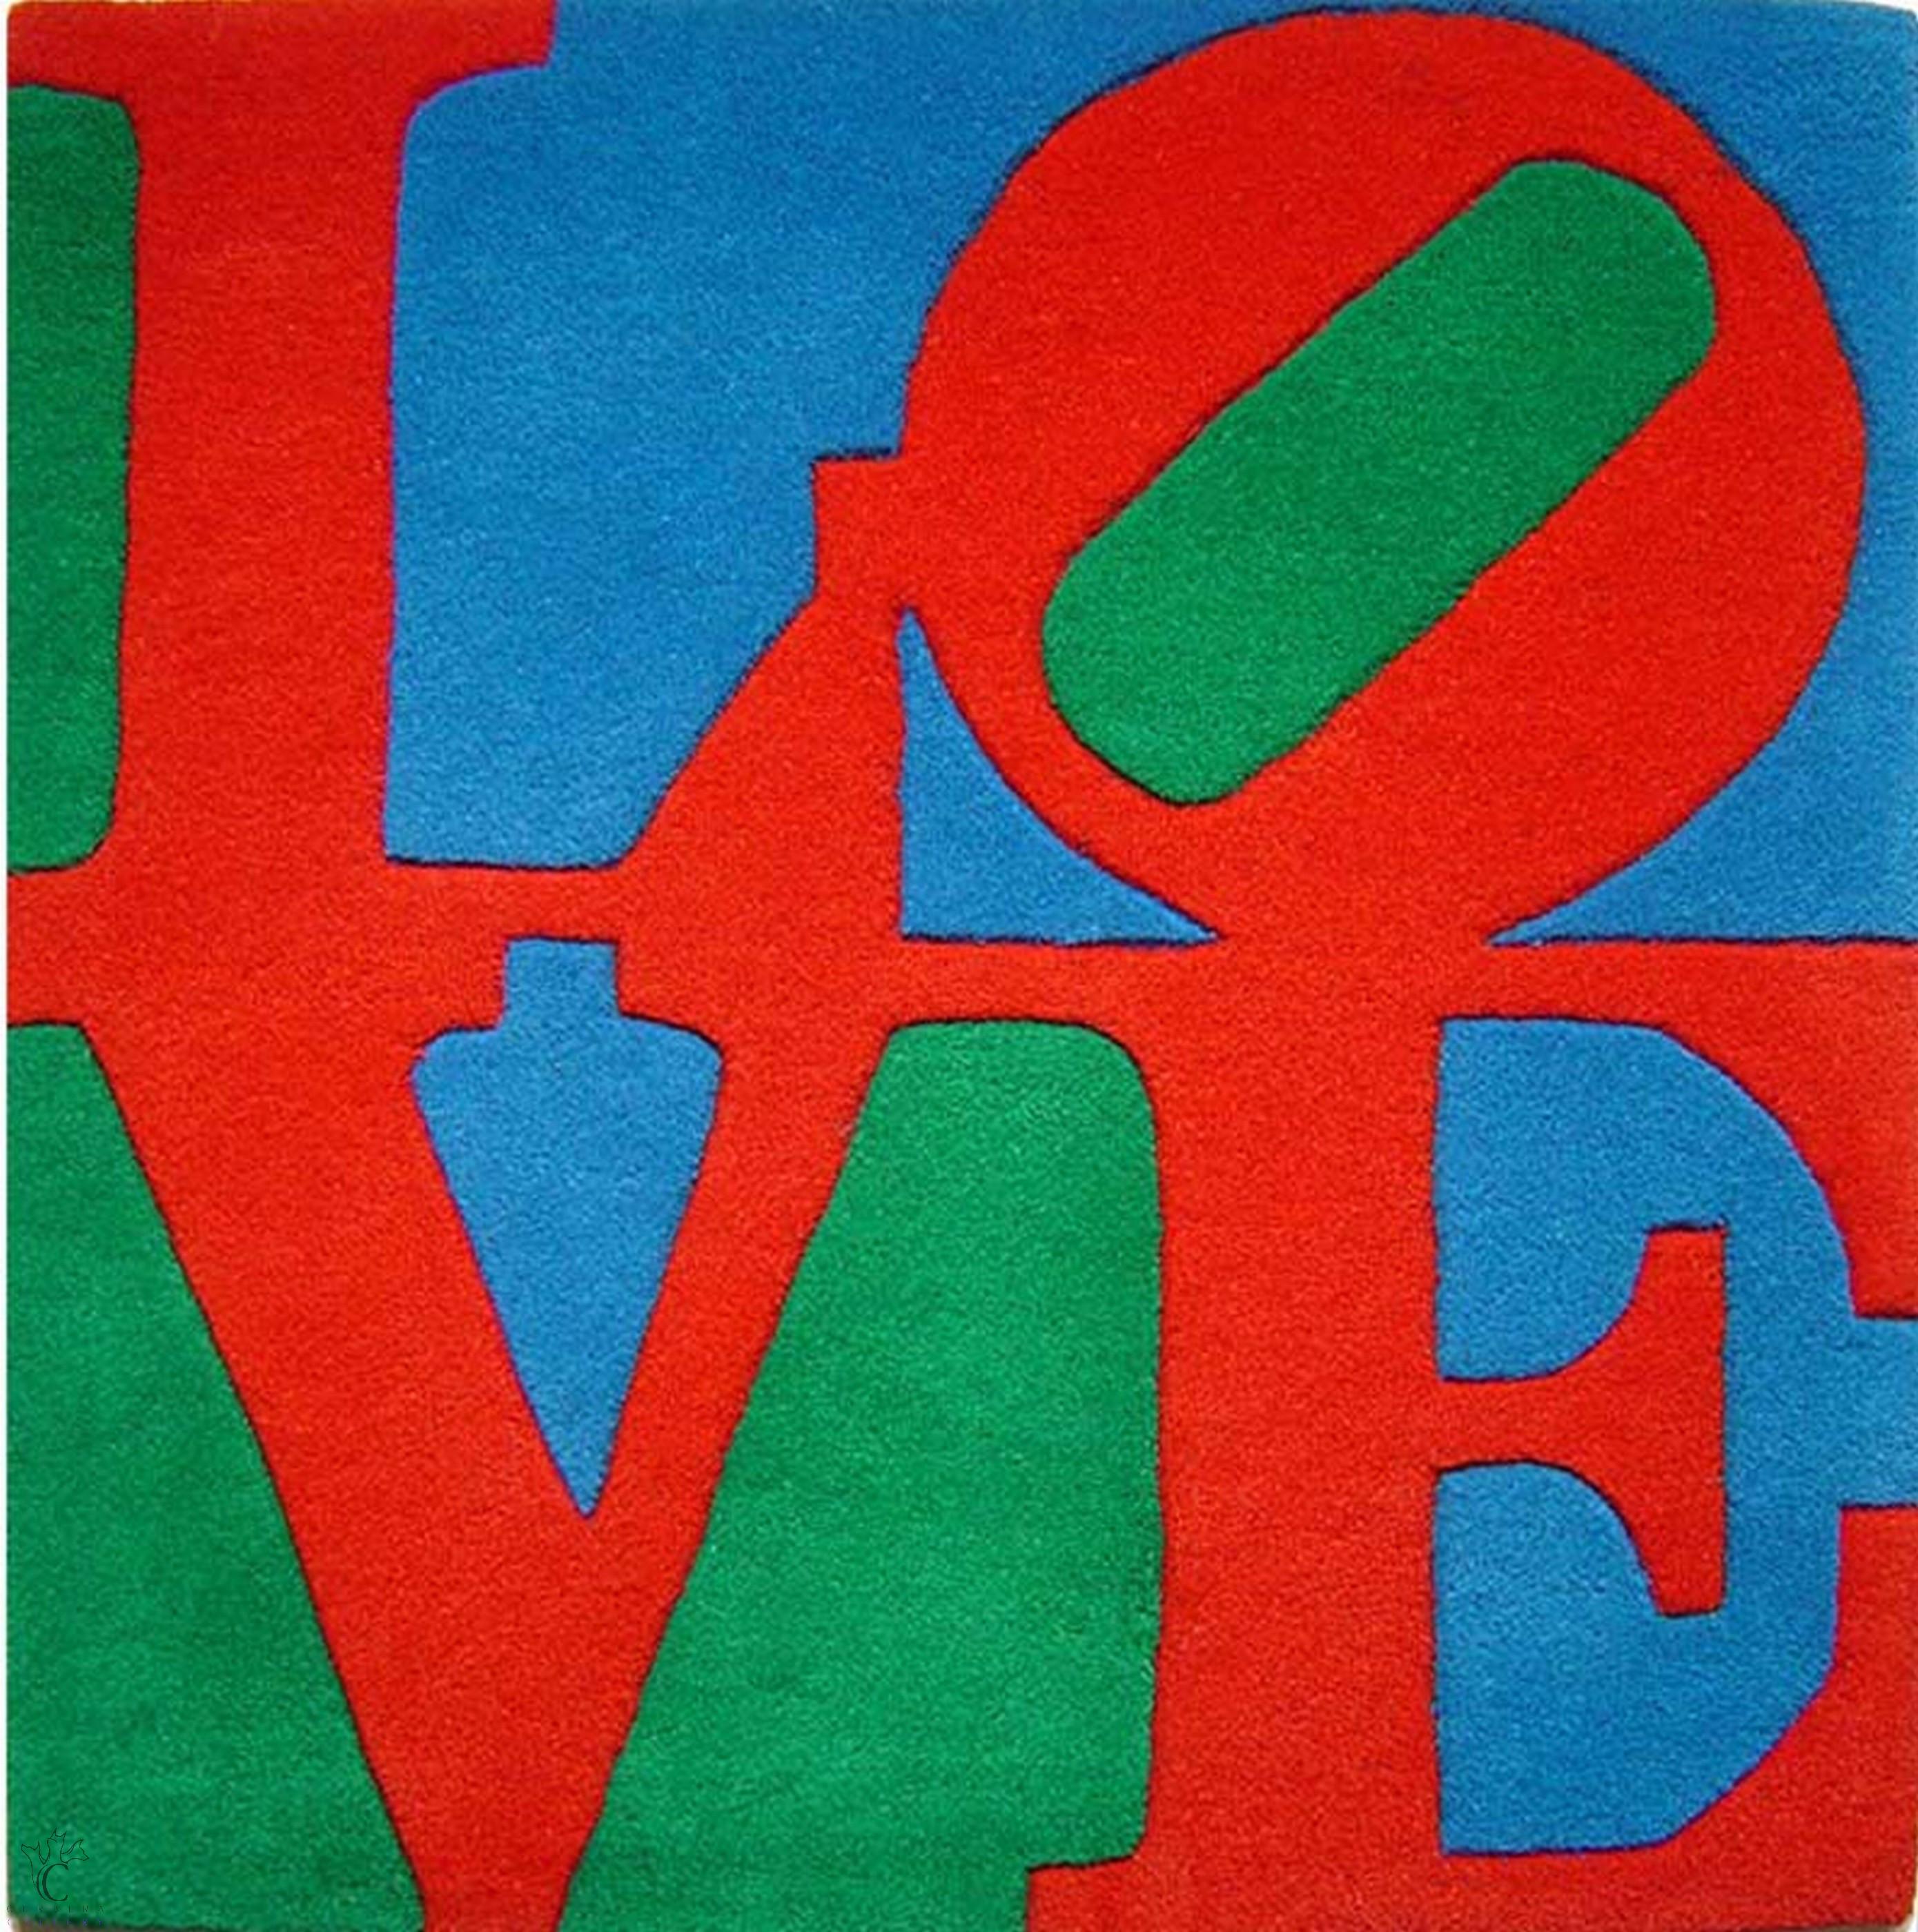 Robert Indiana
Classic LOVE (Pop Art, Modern, Neo-Dada, Iconography, Tuft, Framed)
Tuft - Multiple
1996/2007
Size: 29.1x29.1in 
Edition: 10.000 
COA provided
Ref.: 924802-1819

*framed in a black or white frame made from composite wood/plastic. No